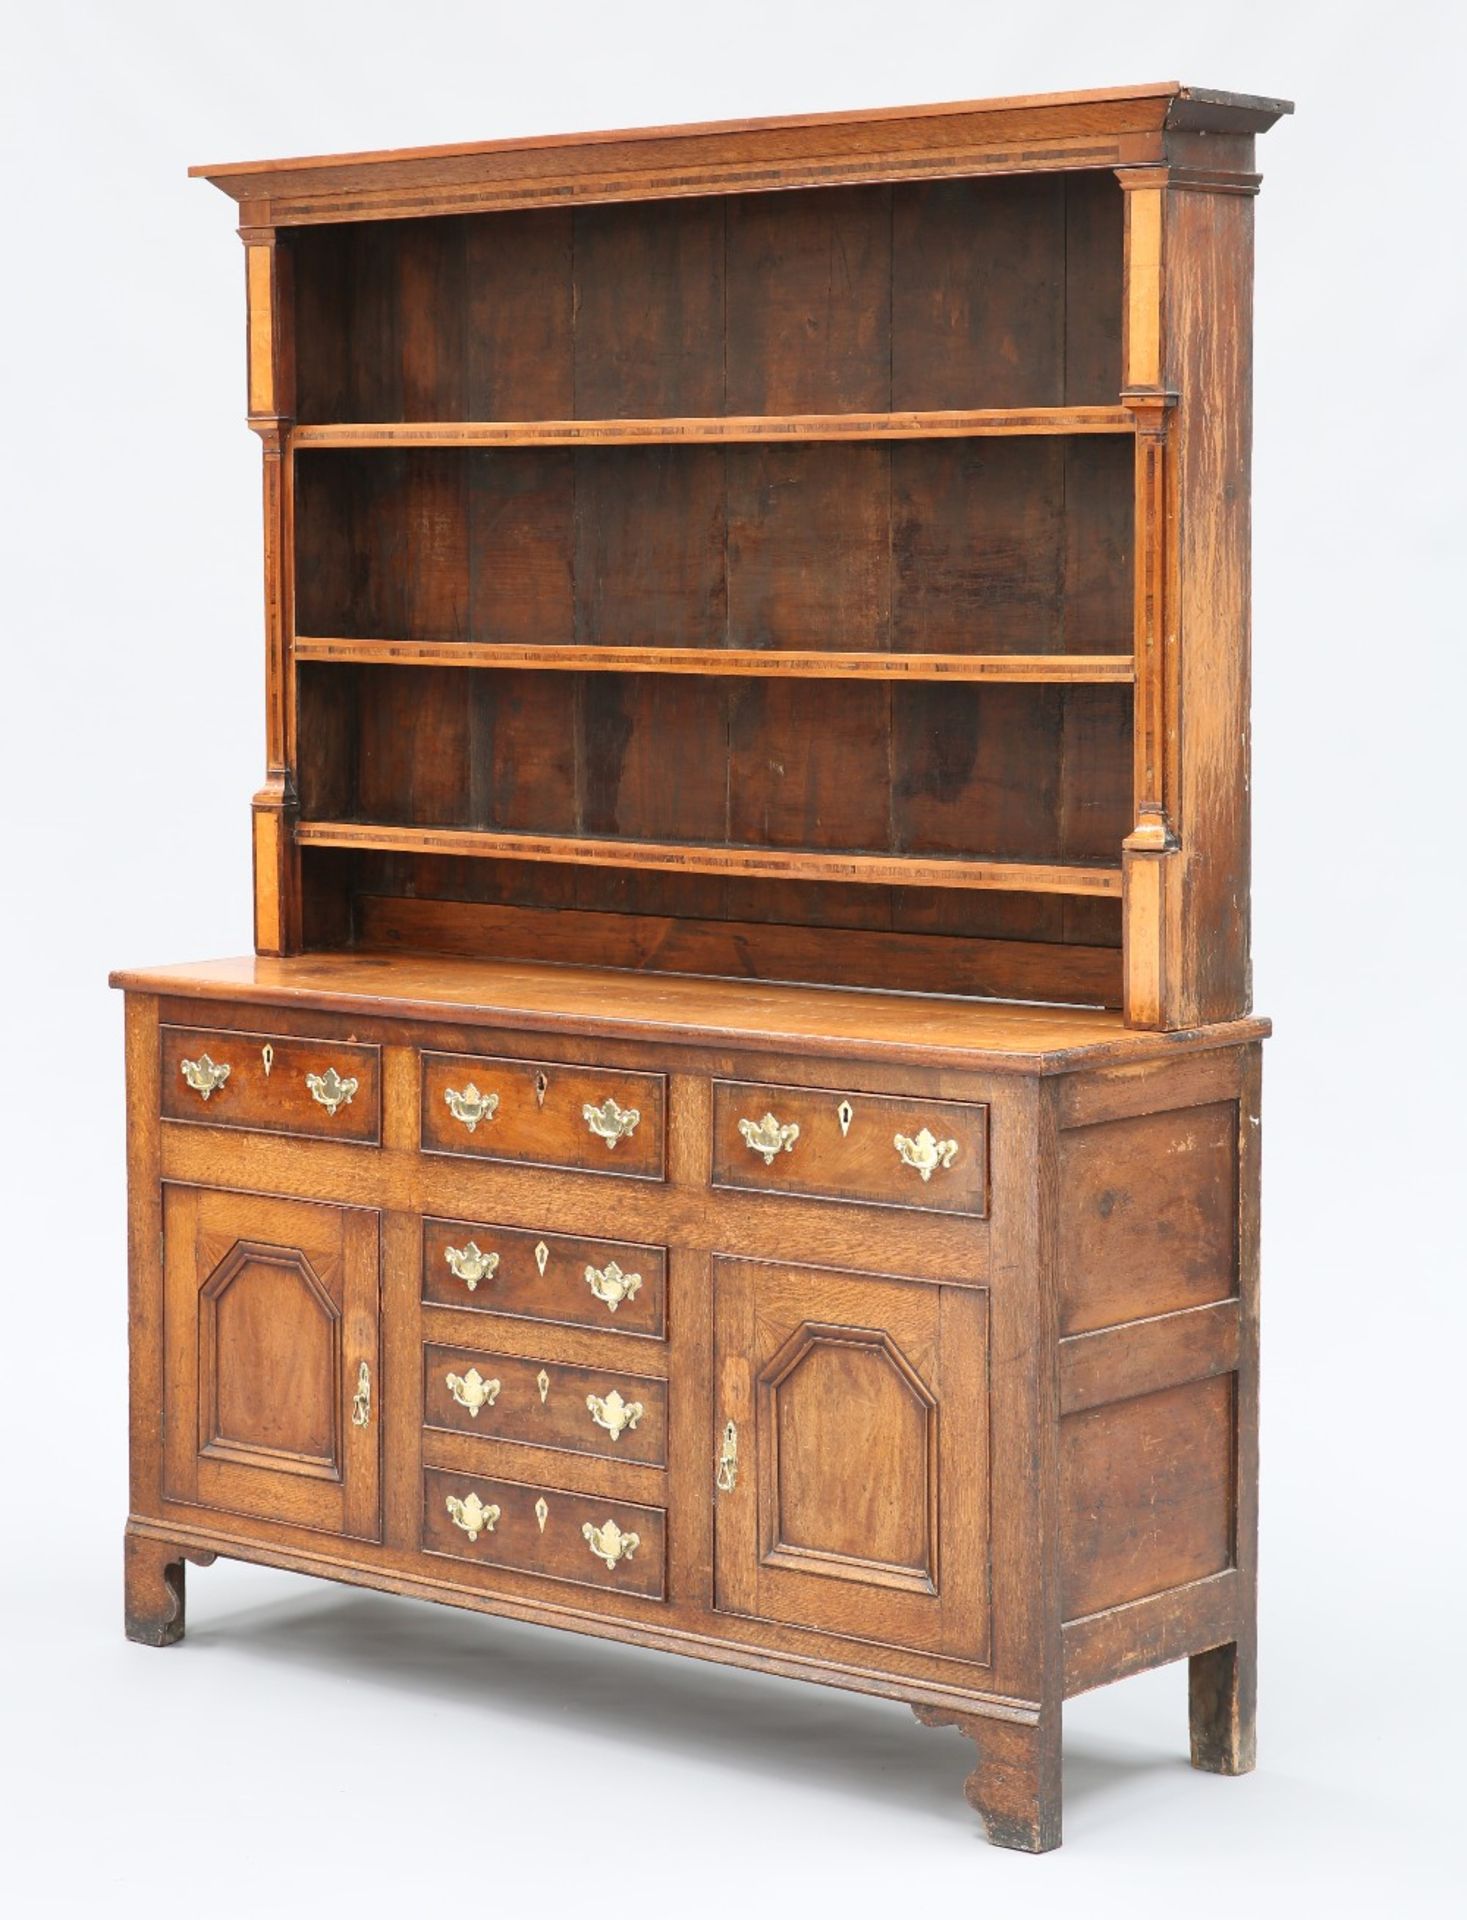 AN INLAID OAK DRESSER AND RACK, NORTH WALES, EARLY 19TH CENTURY